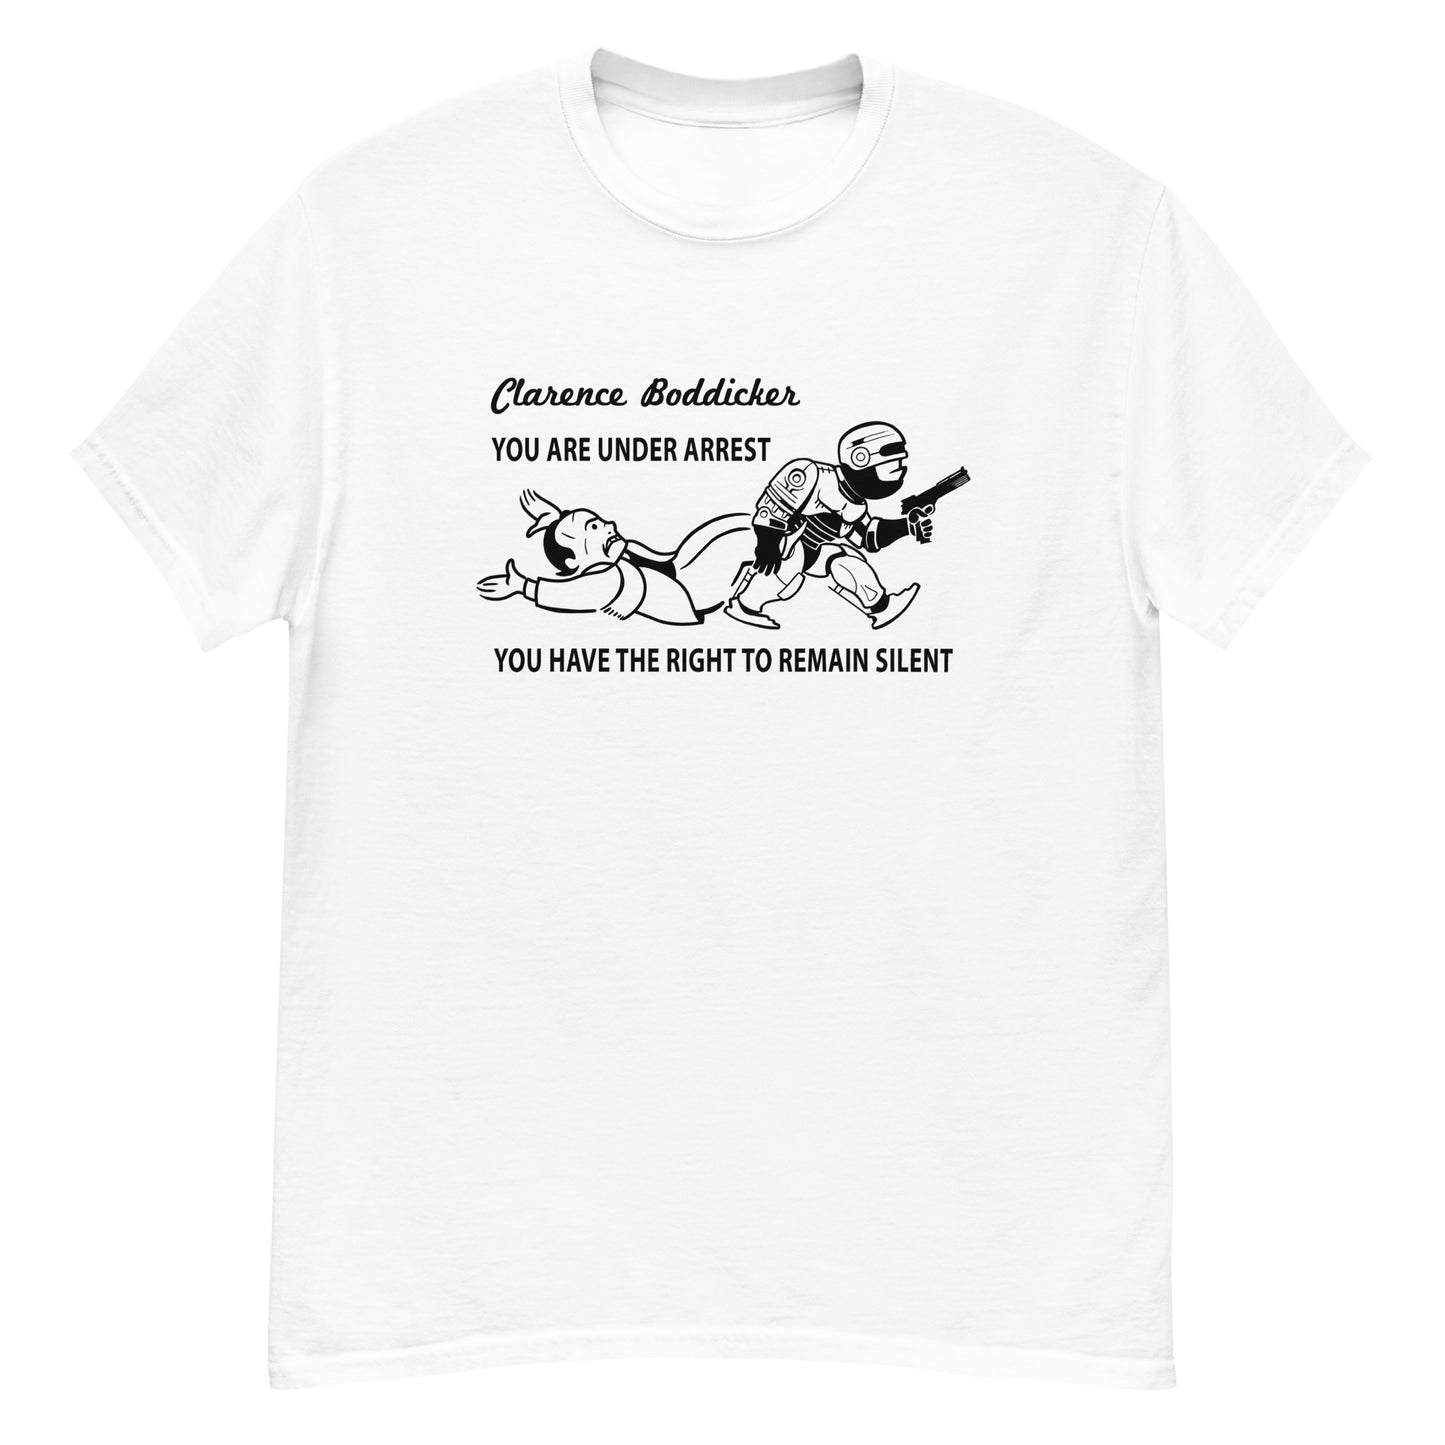 Go Directly To Jail, Creep! t-shirt